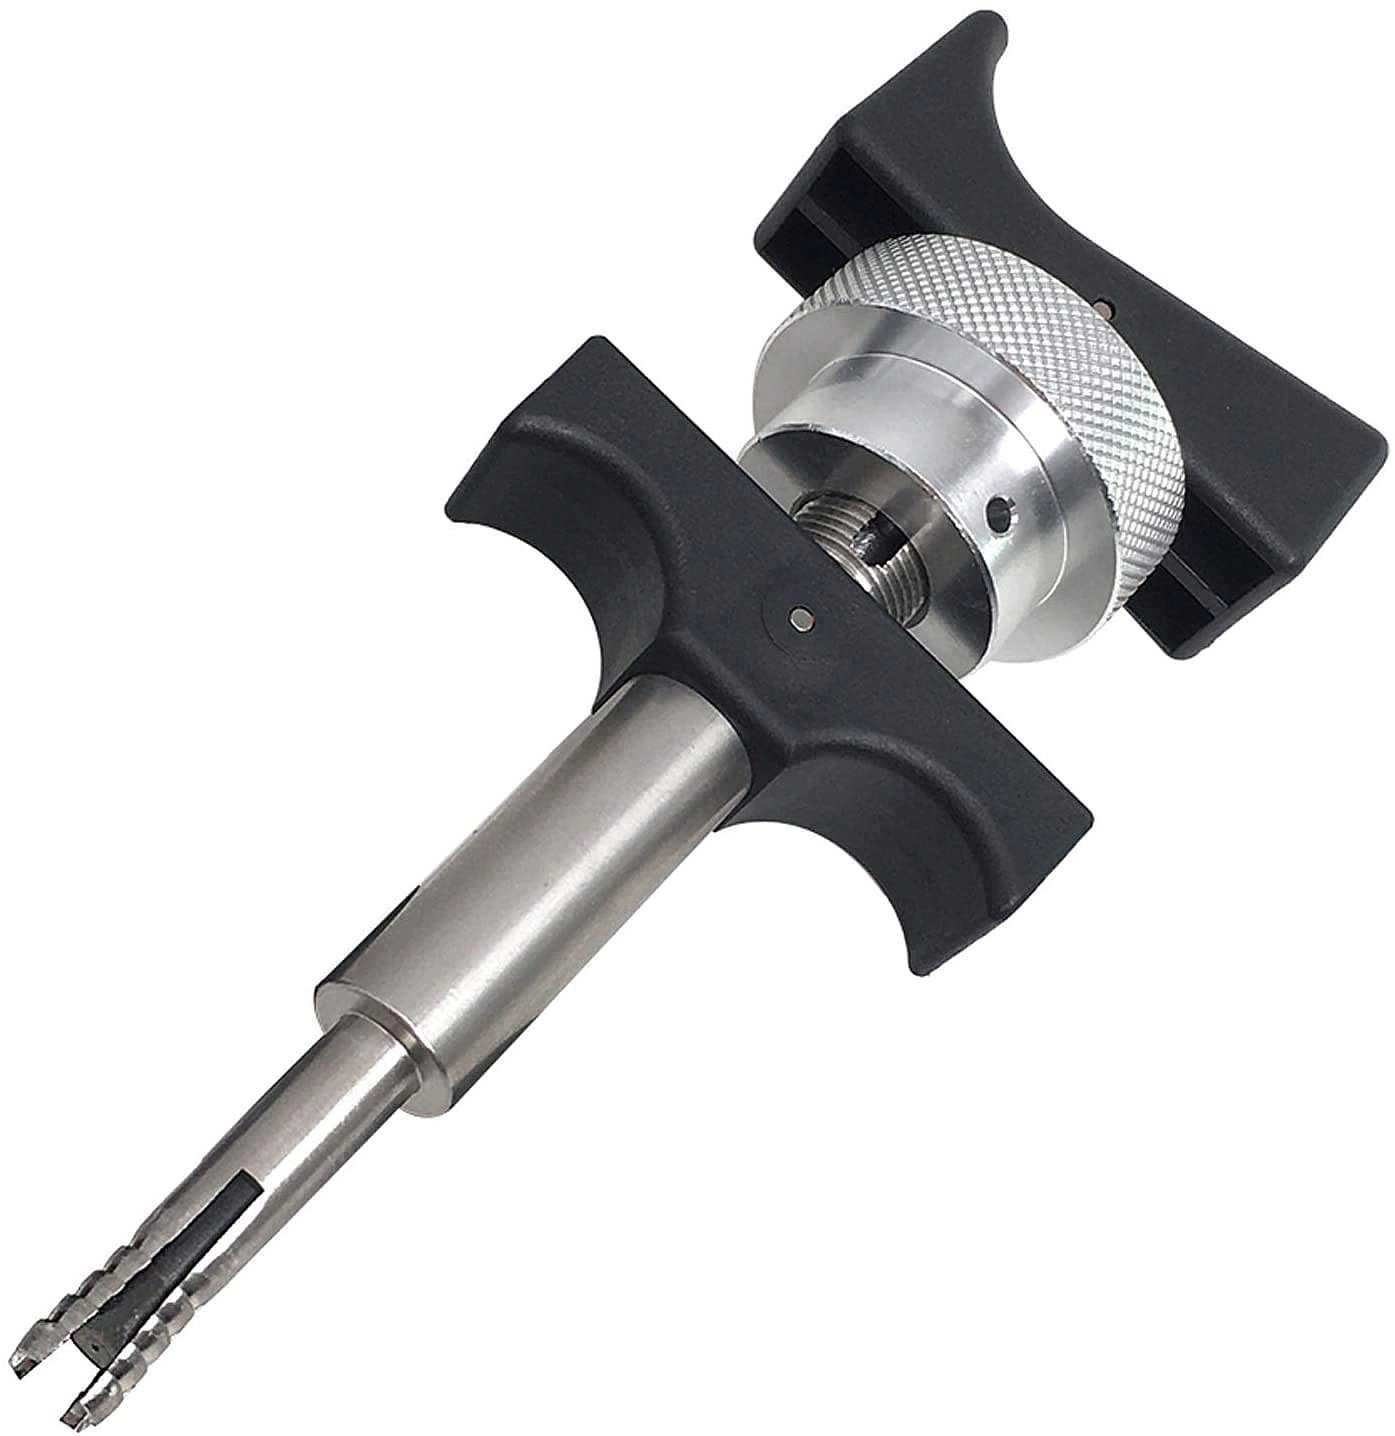 Ignition coil disassembly tool like VAG VW T10530